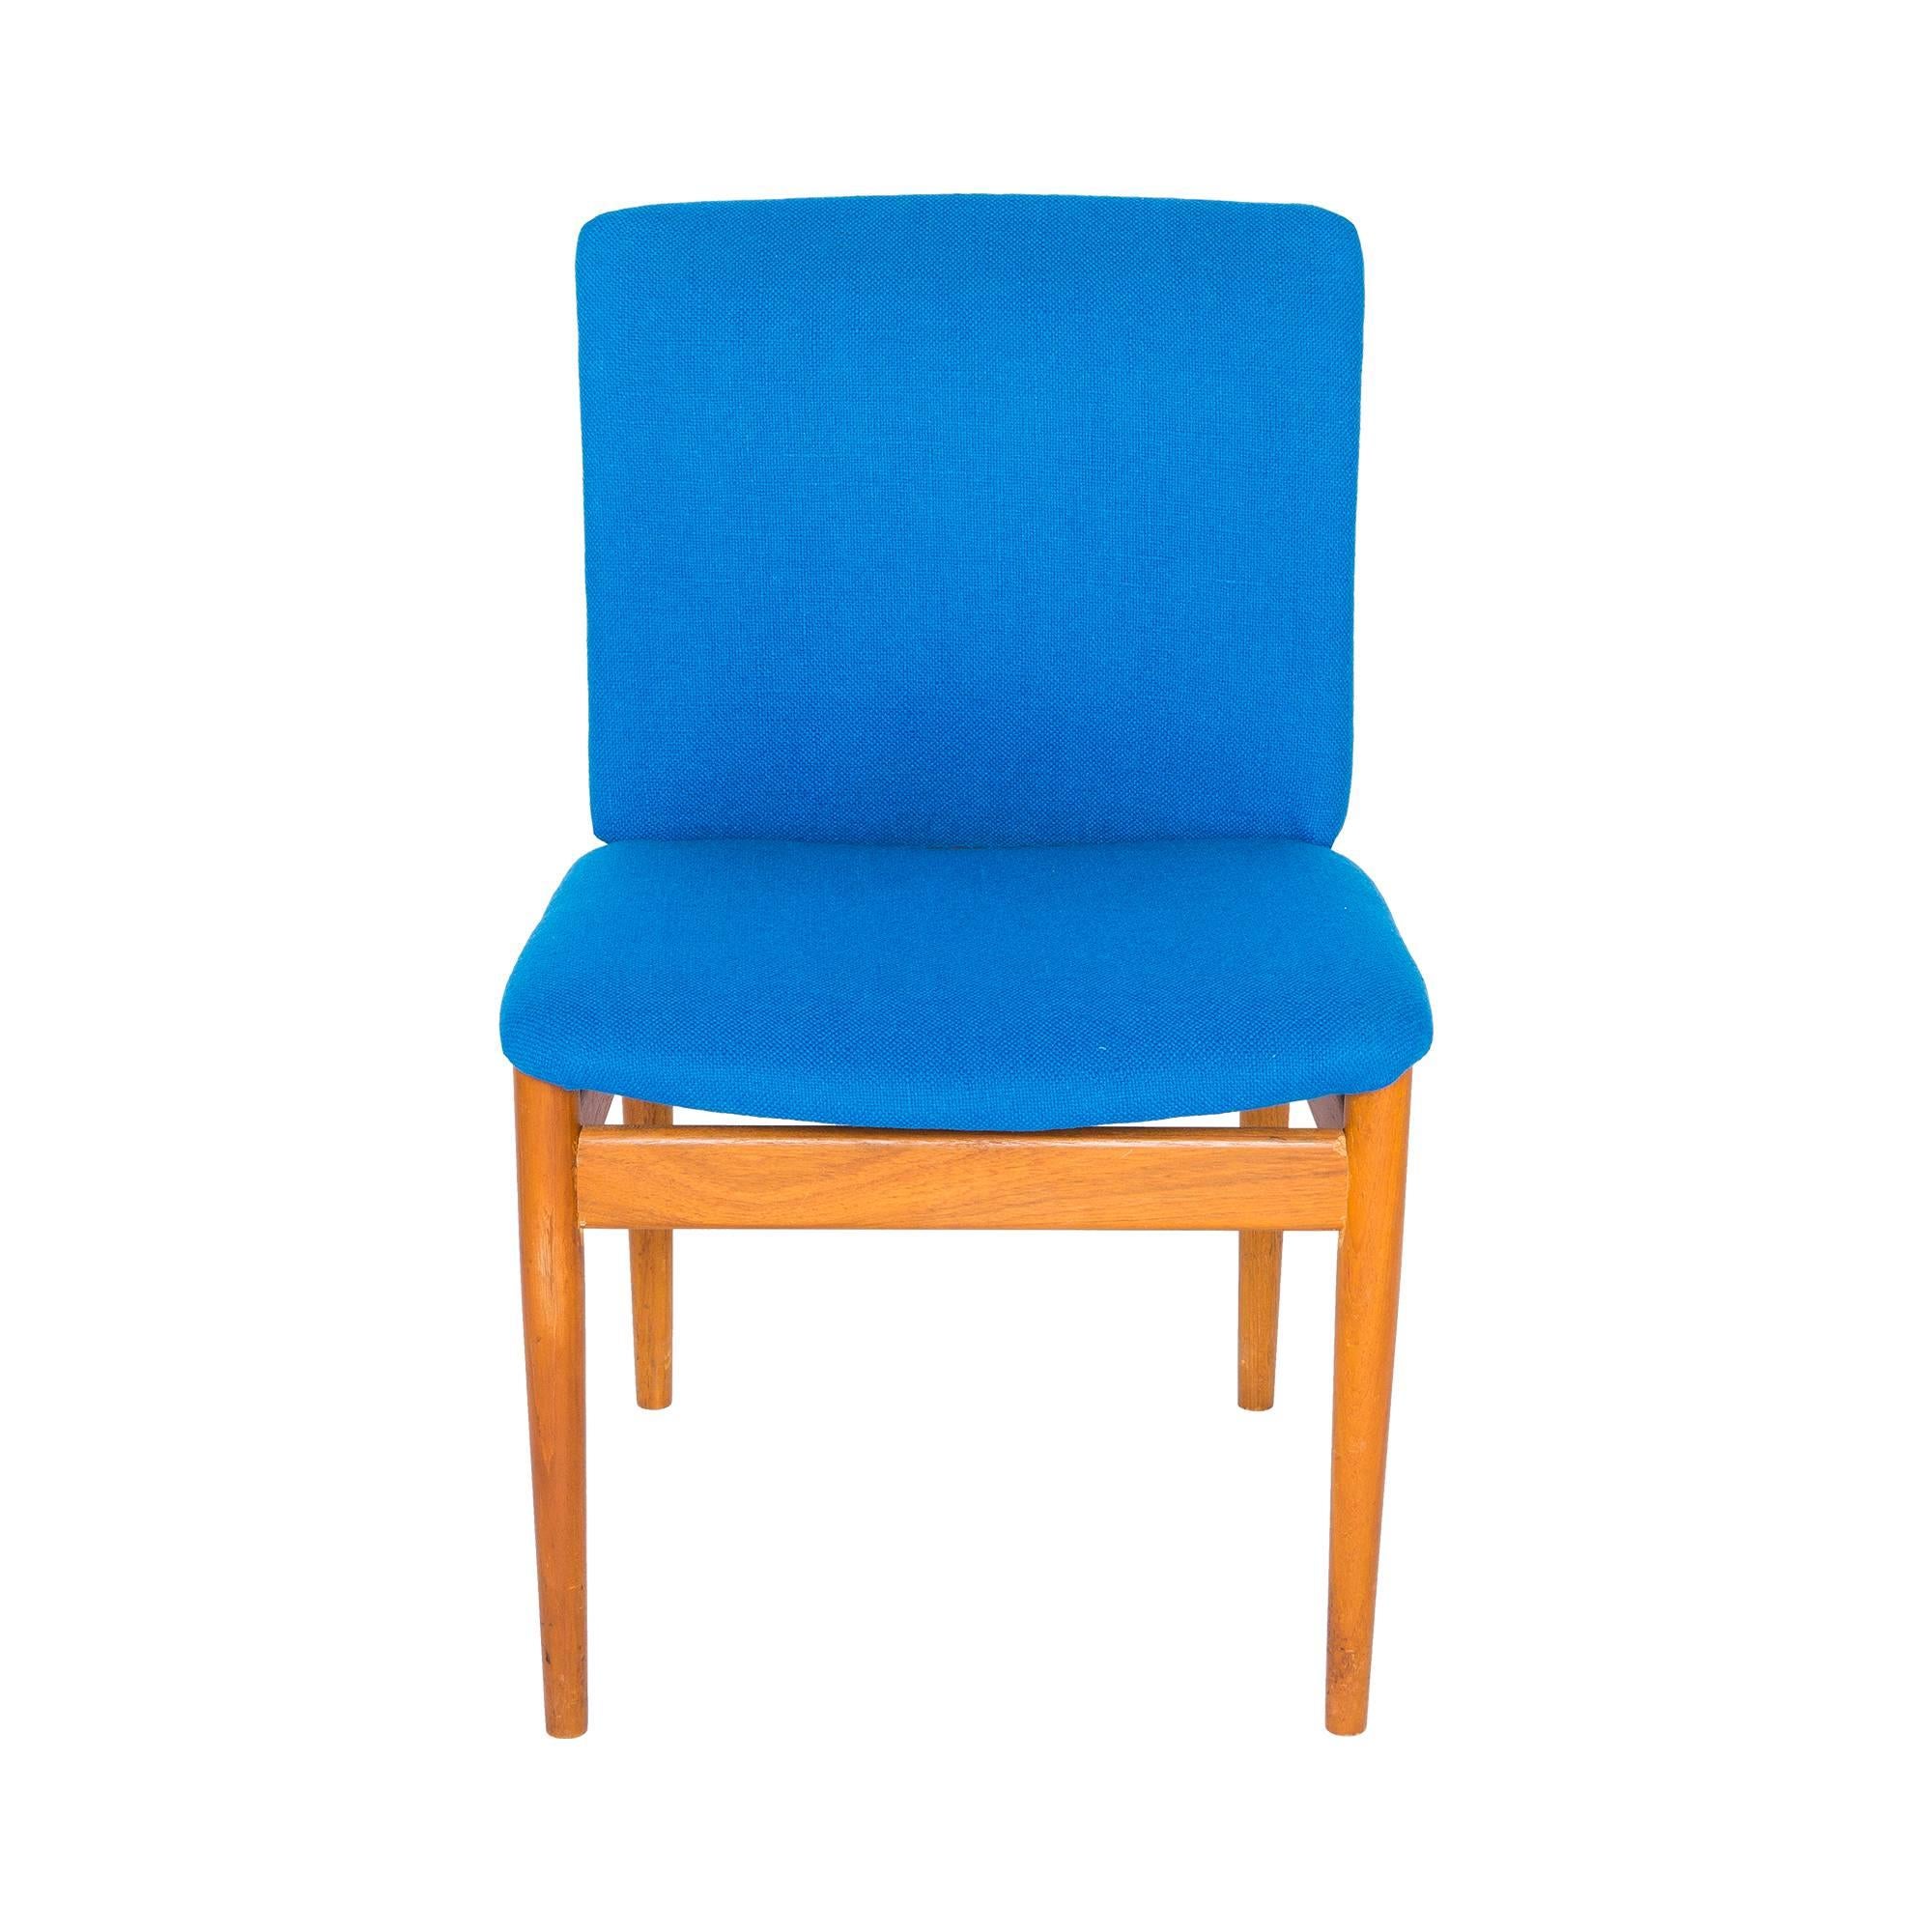 These model 191 dining side chairs, by Finn Juhl for France & Son / Daverkosen, are excellent examples, with rich color and grain in the Teak and vibrant color in the original upholstery. Each adorned with pristine plaques from John Stuart, which